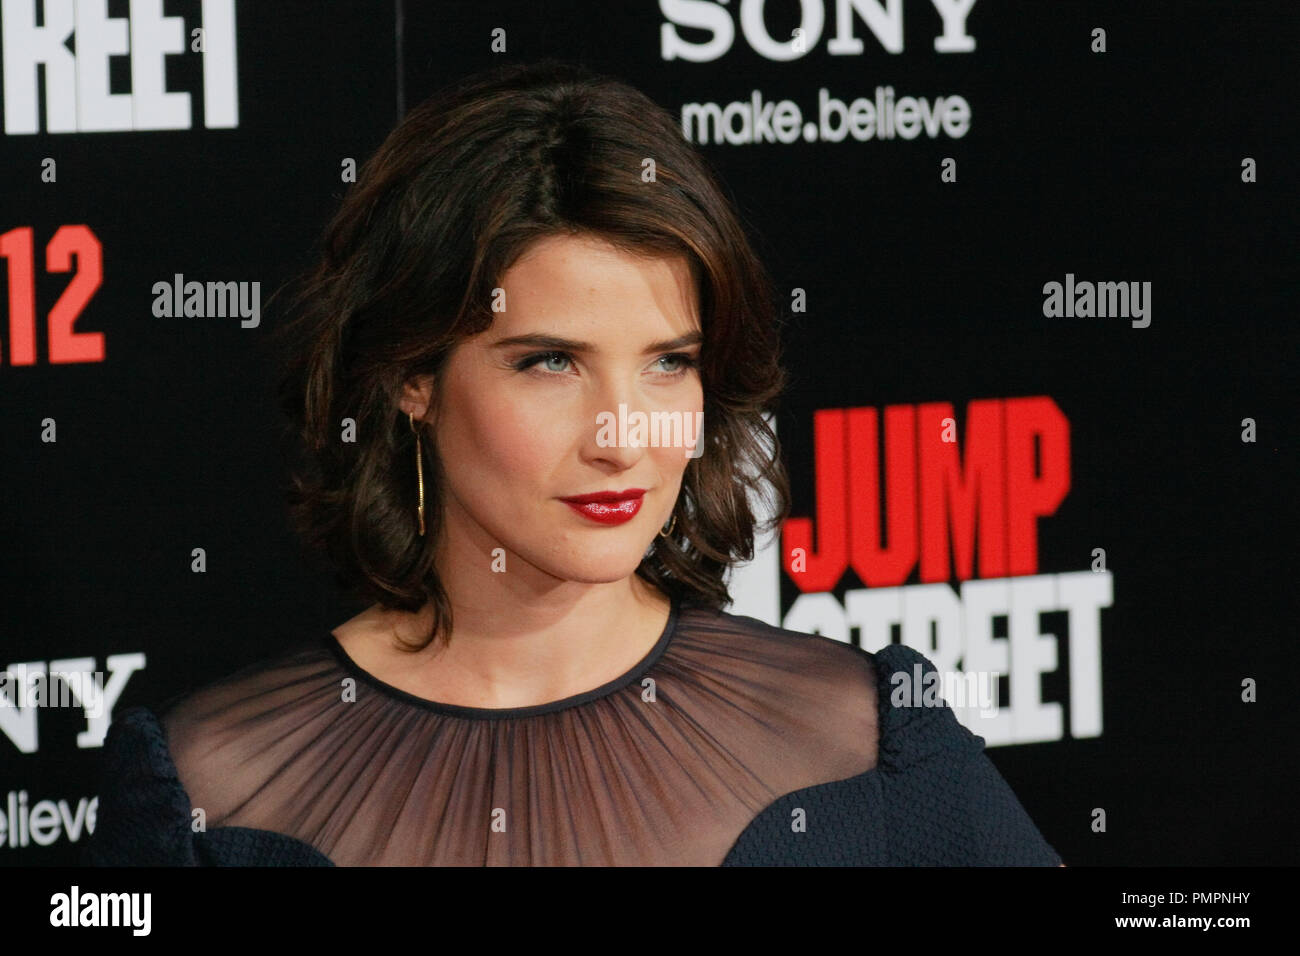 Cobie Smulders at the Premiere of Columbia Pictures' '21 Jump Street'. Arrivals held at Grauman's Chinese Theater in Hollywood, CA, March 13, 2012. Photo by Joe Martinez / PictureLux Stock Photo